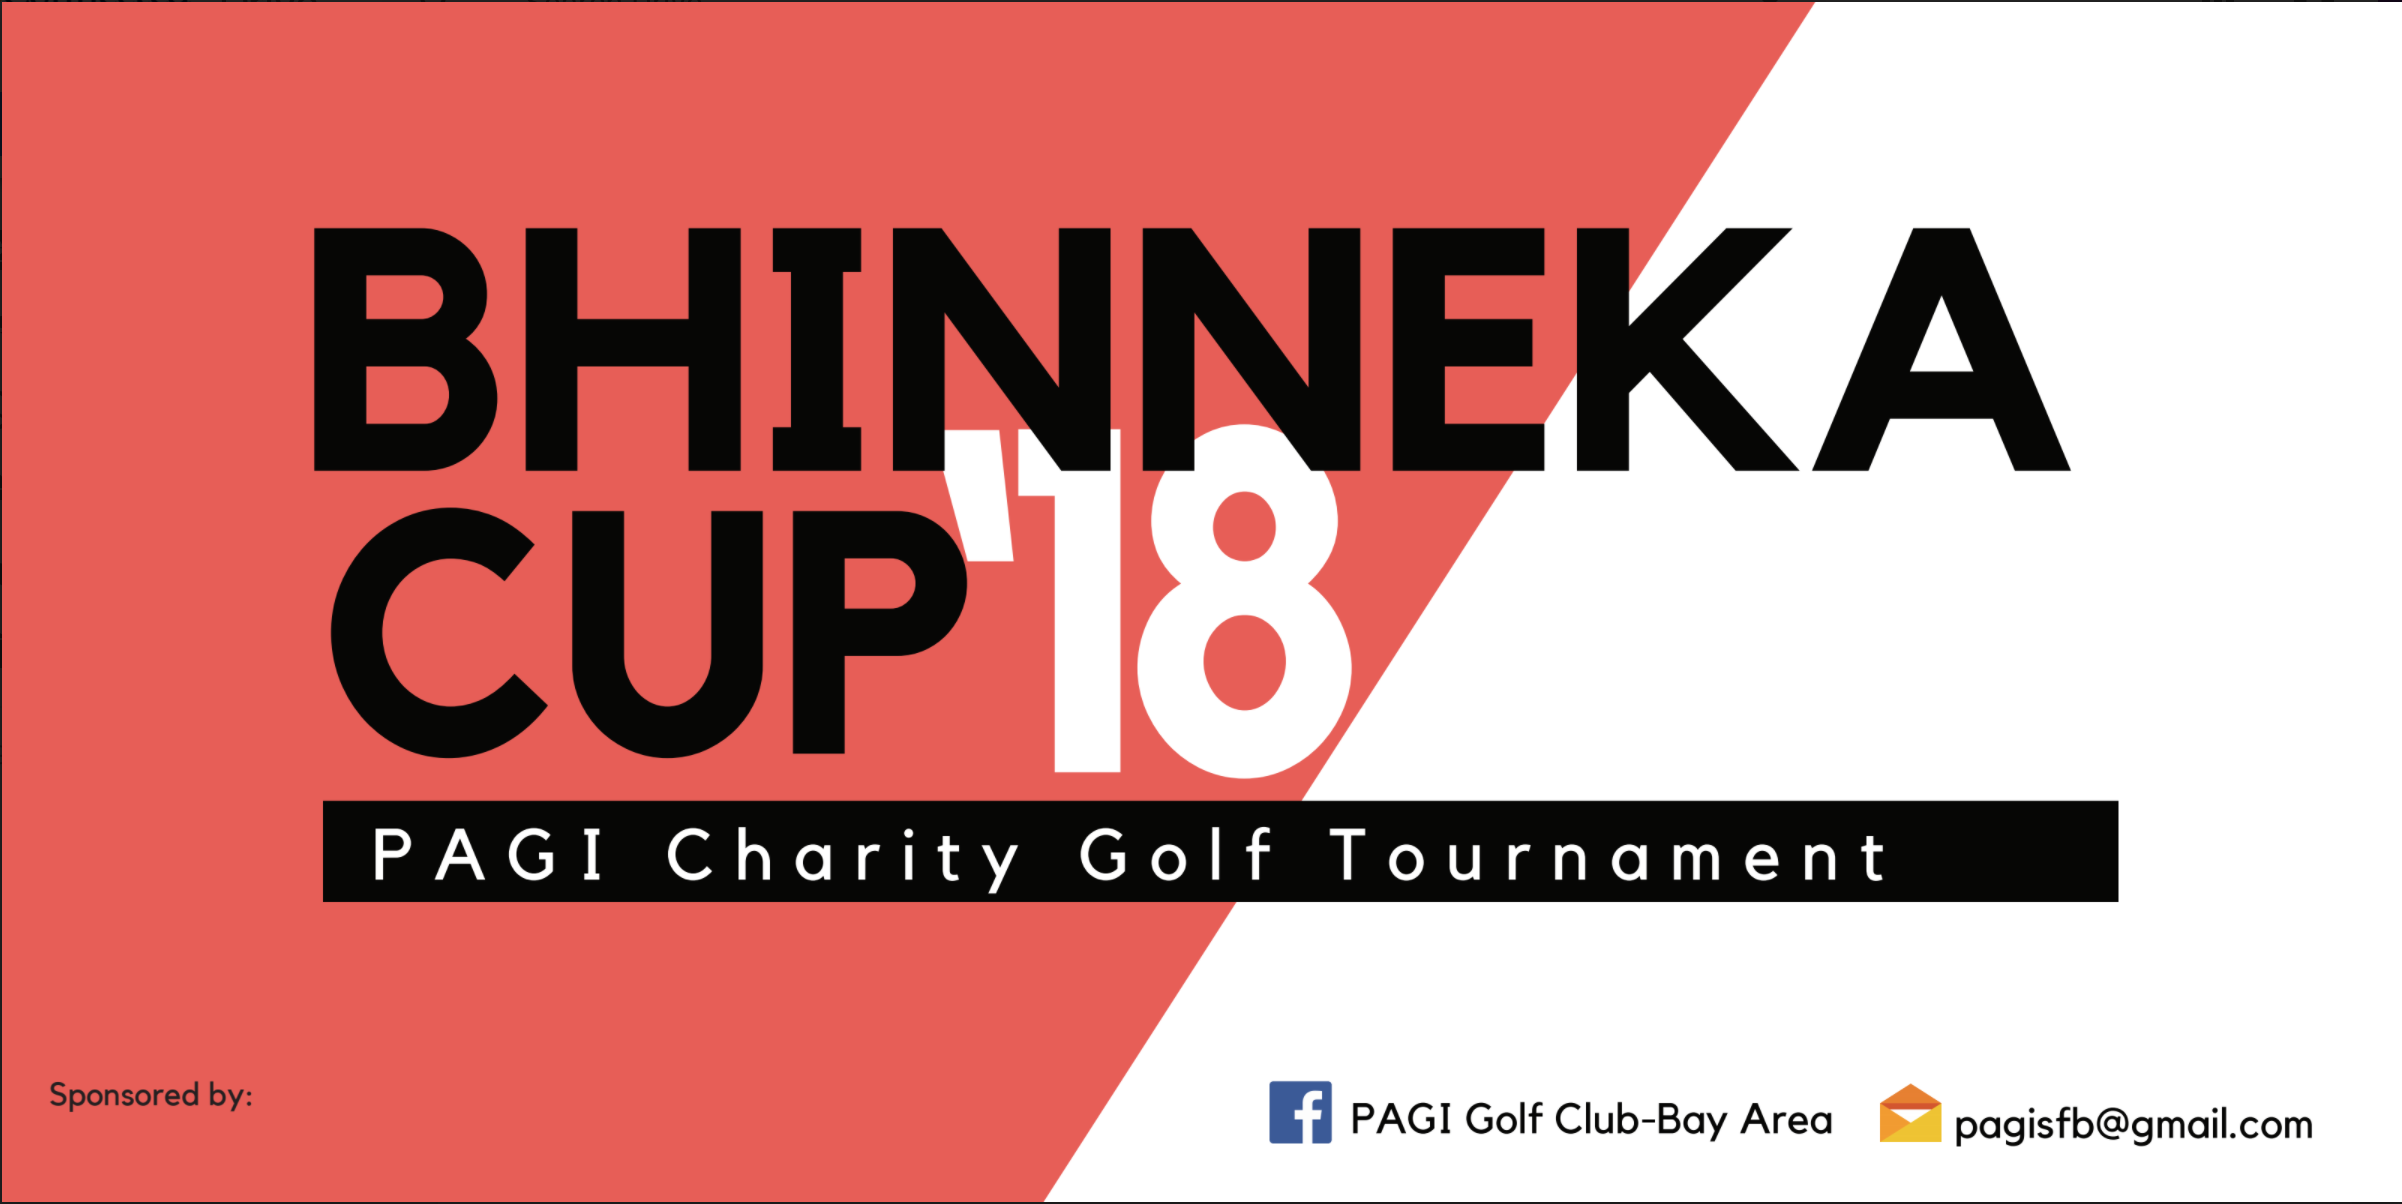 Bhinneka Cup 2018 (Open to all golfers!)